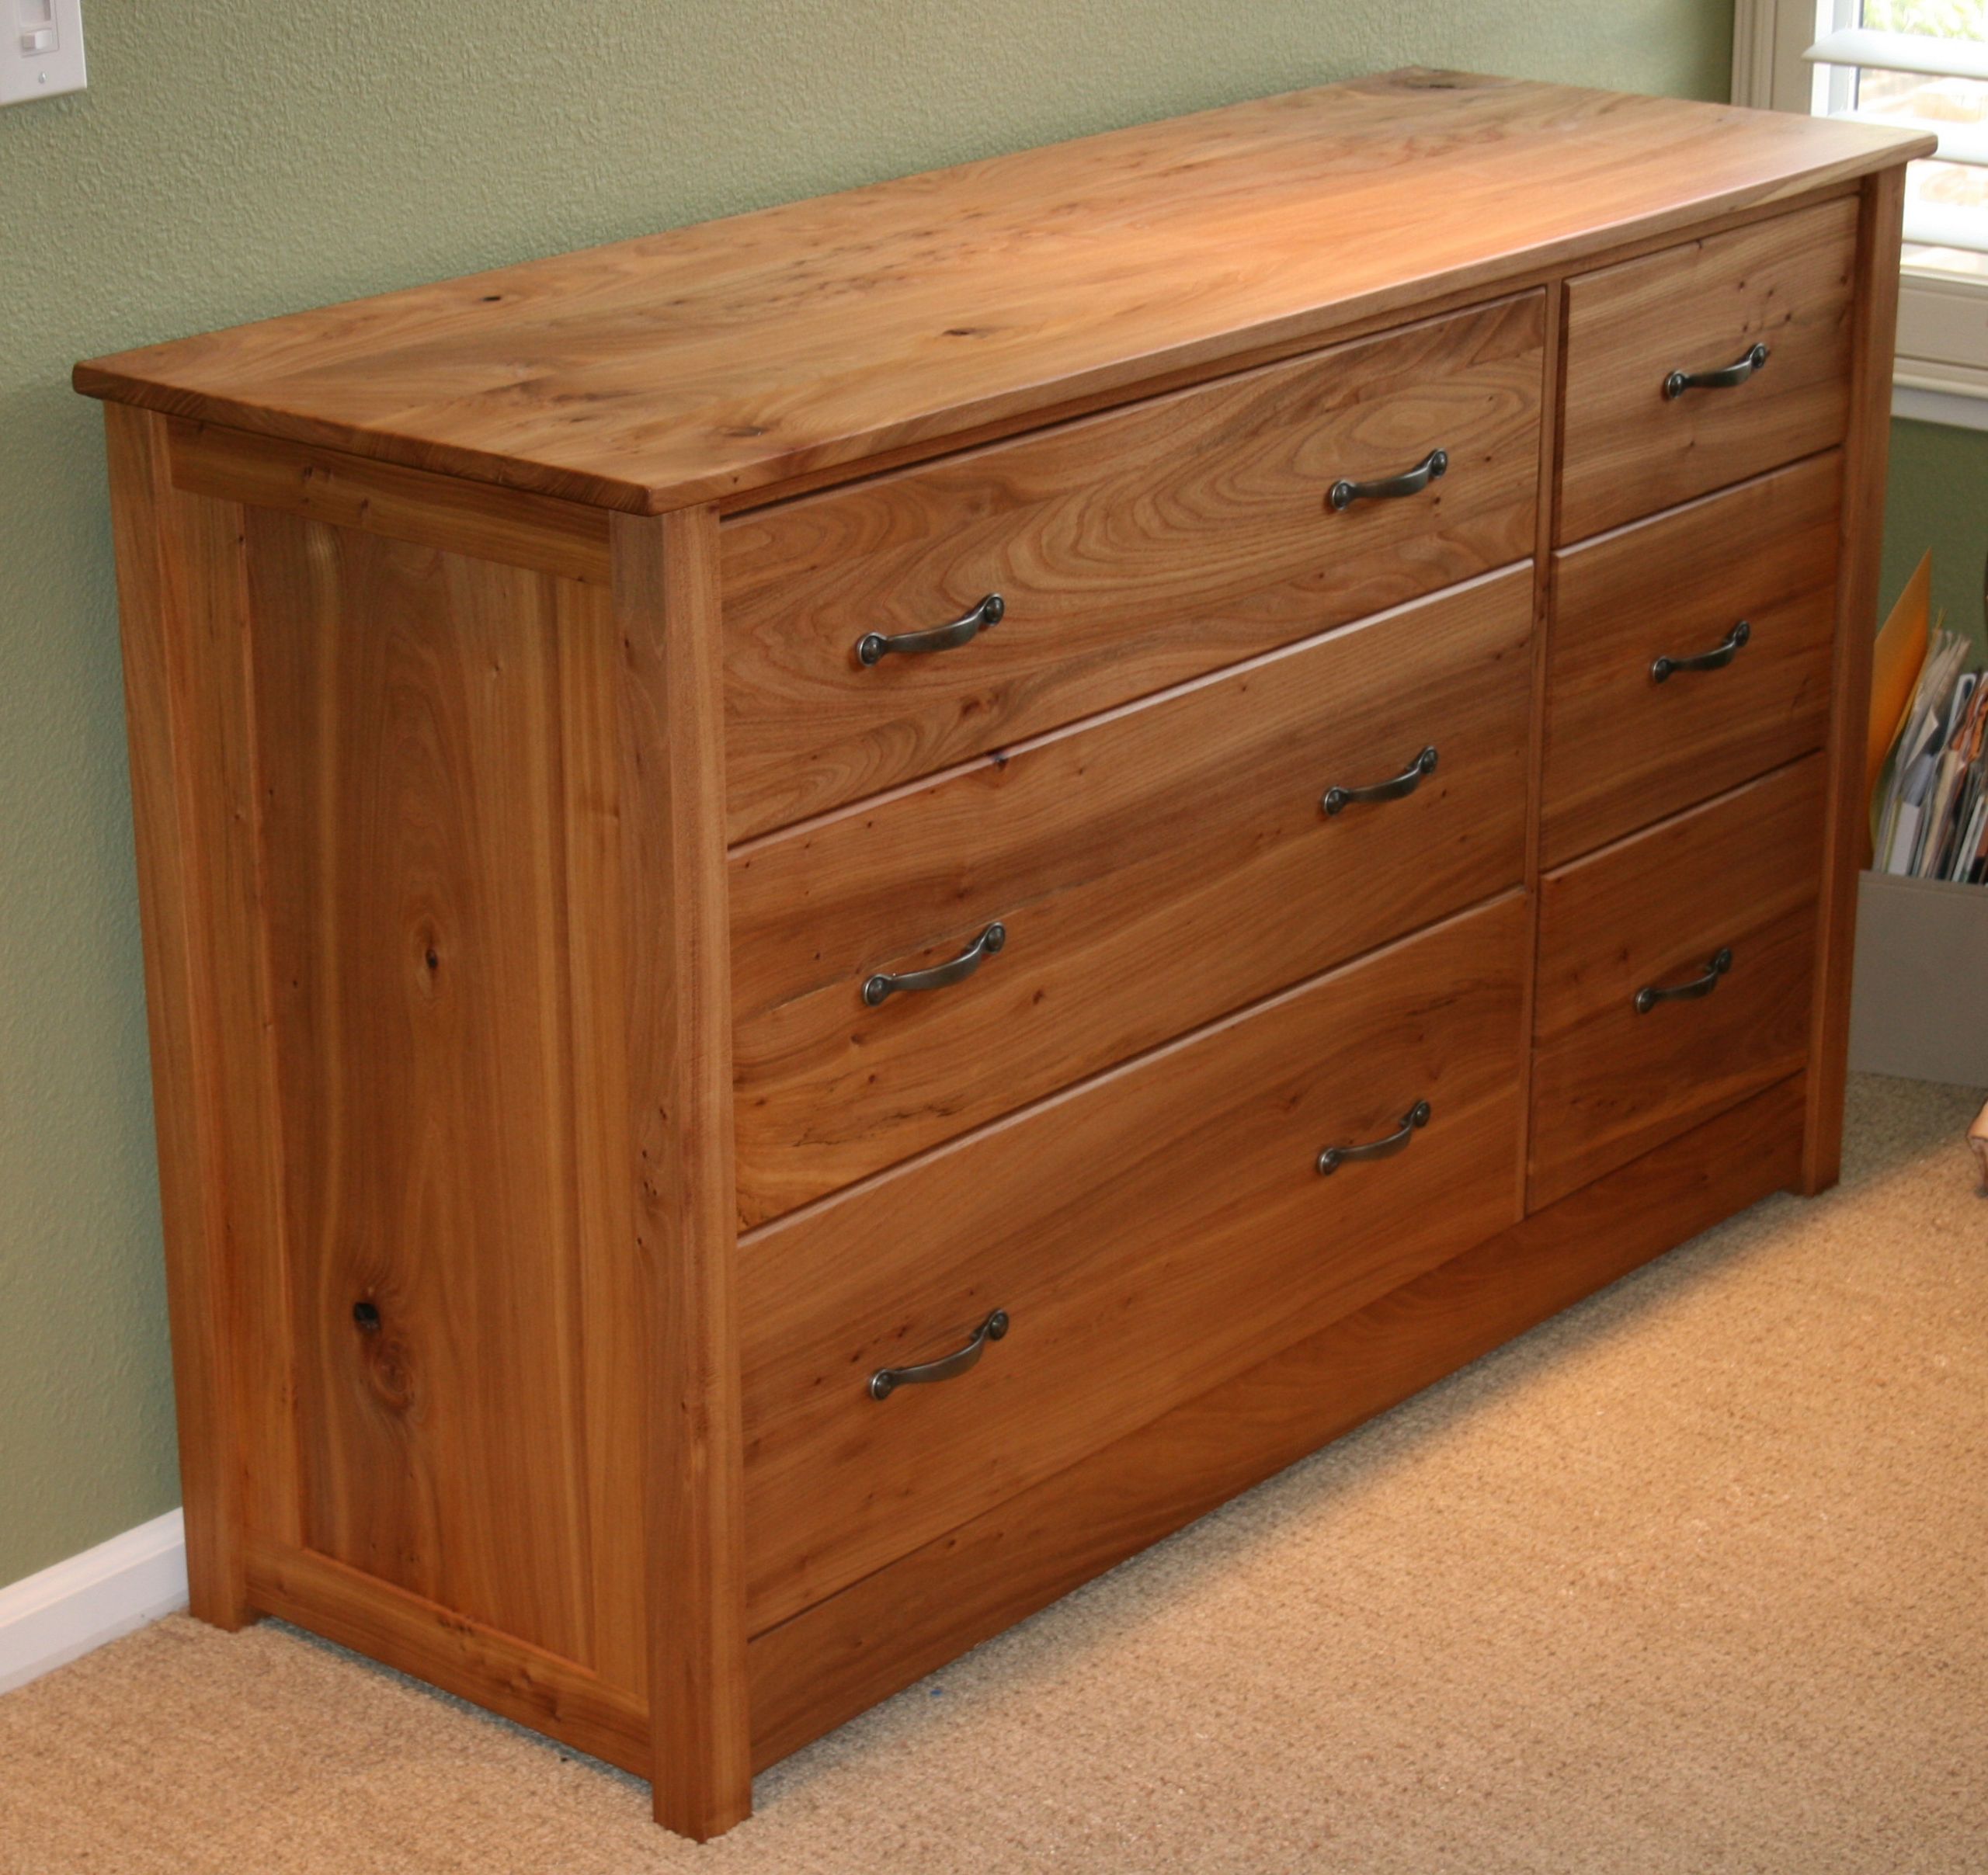 DIY Wood Chest Plans
 DIY Chest Drawers Plans Woodworking PDF Download wall